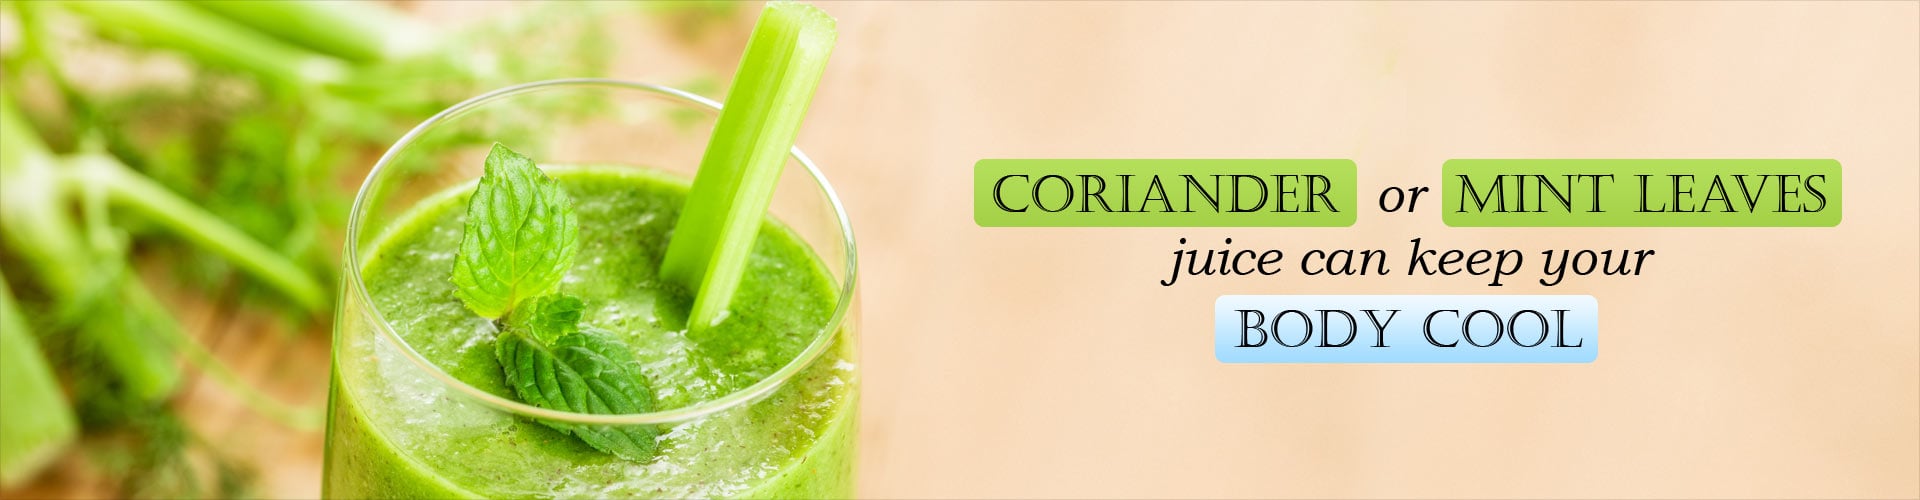 Coriander or mint leaves juice can keep your body cool